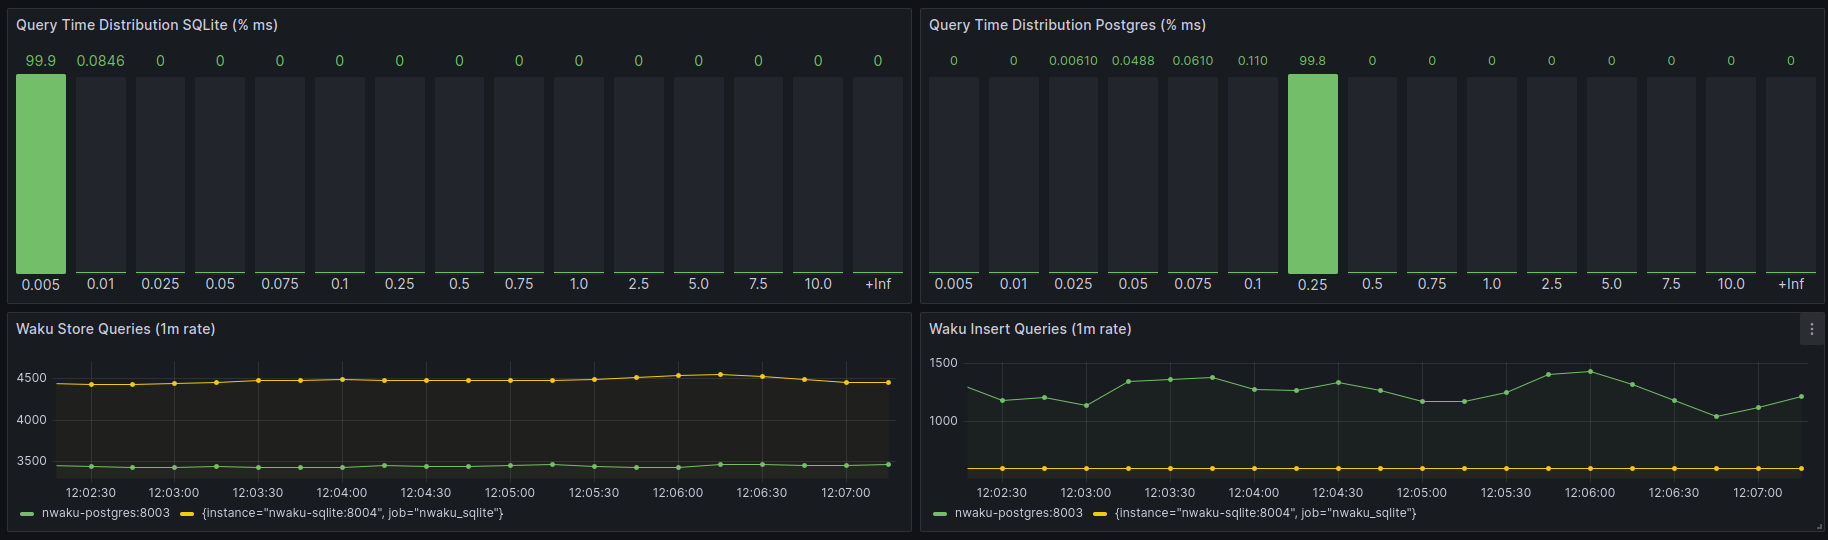 Query time distribution